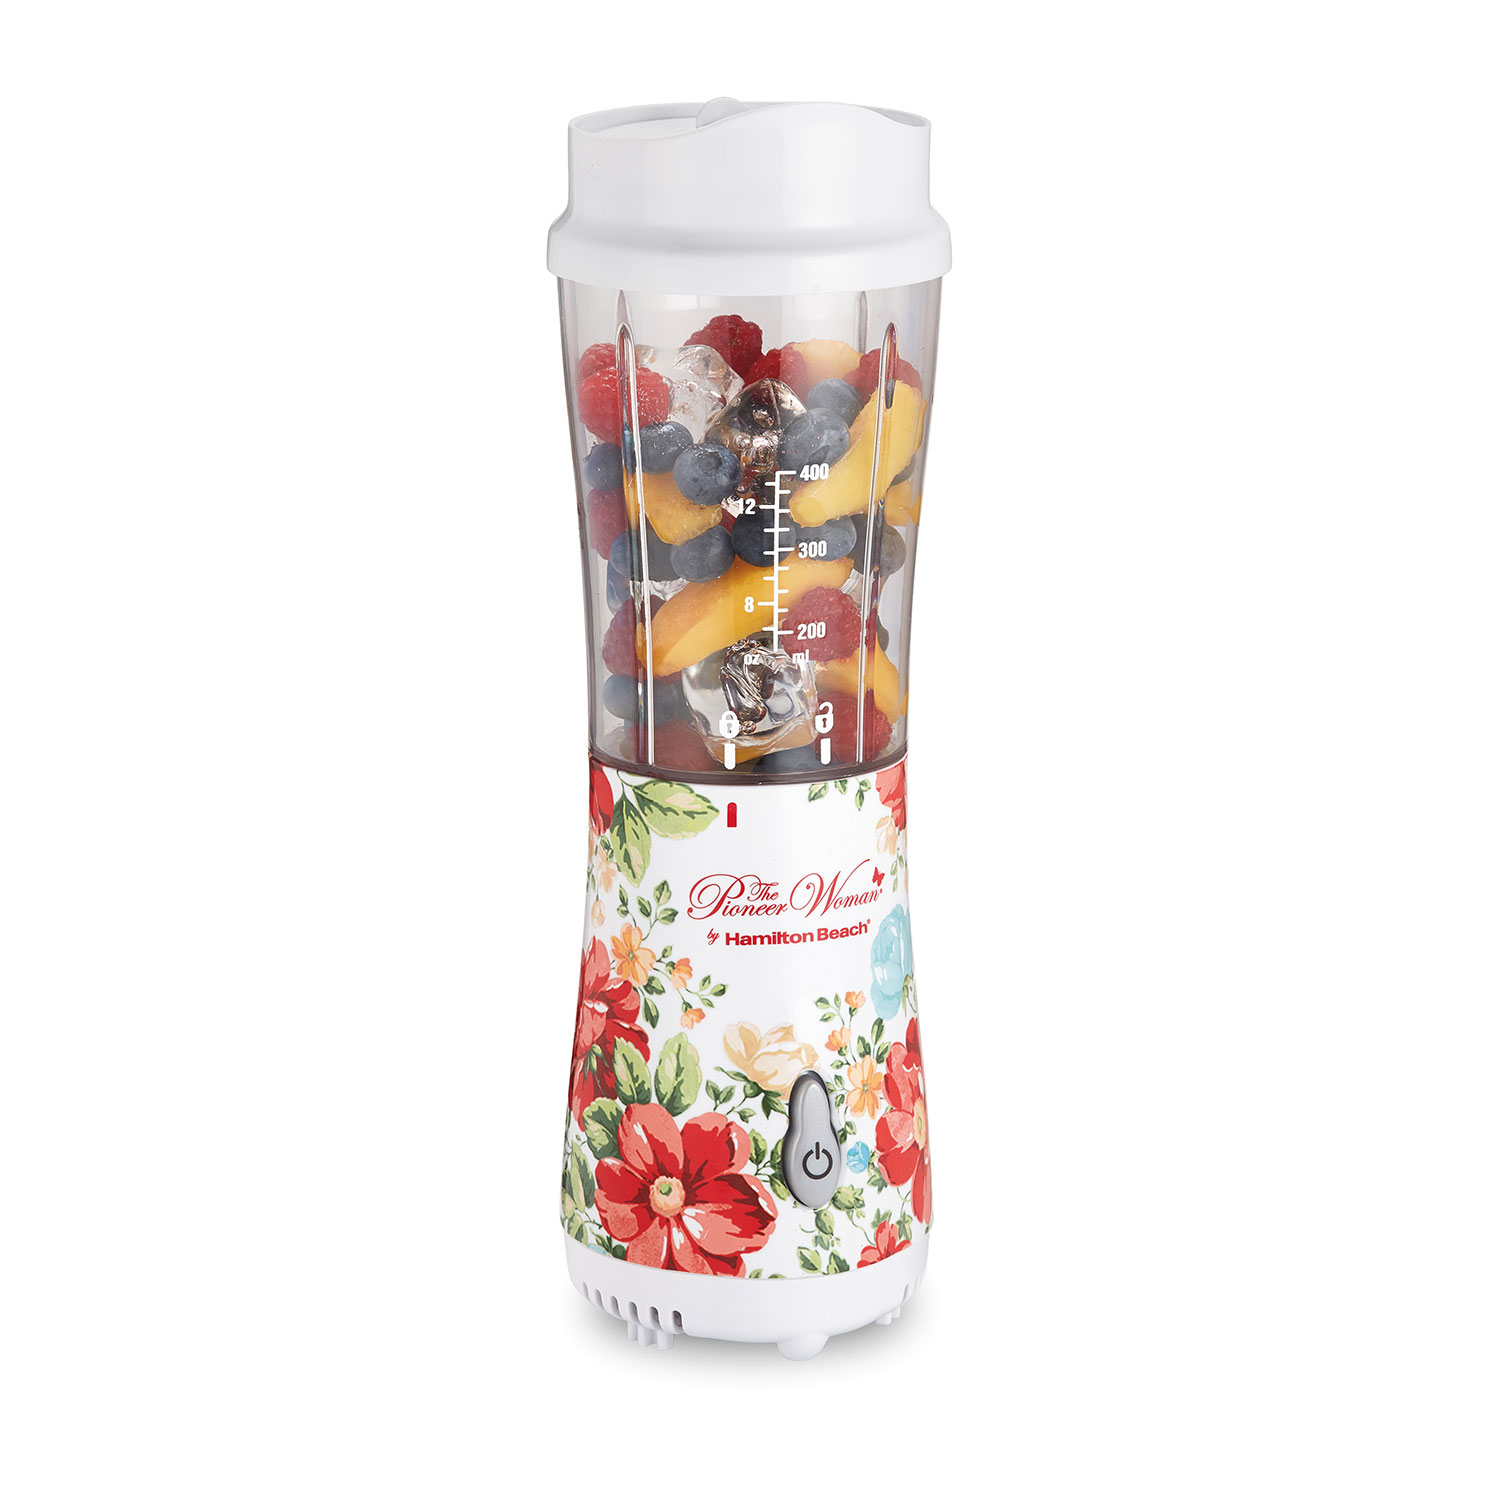 The Pioneer Woman Vintage Floral Personal Blender with Travel Lid by Hamilton Beach (51170)